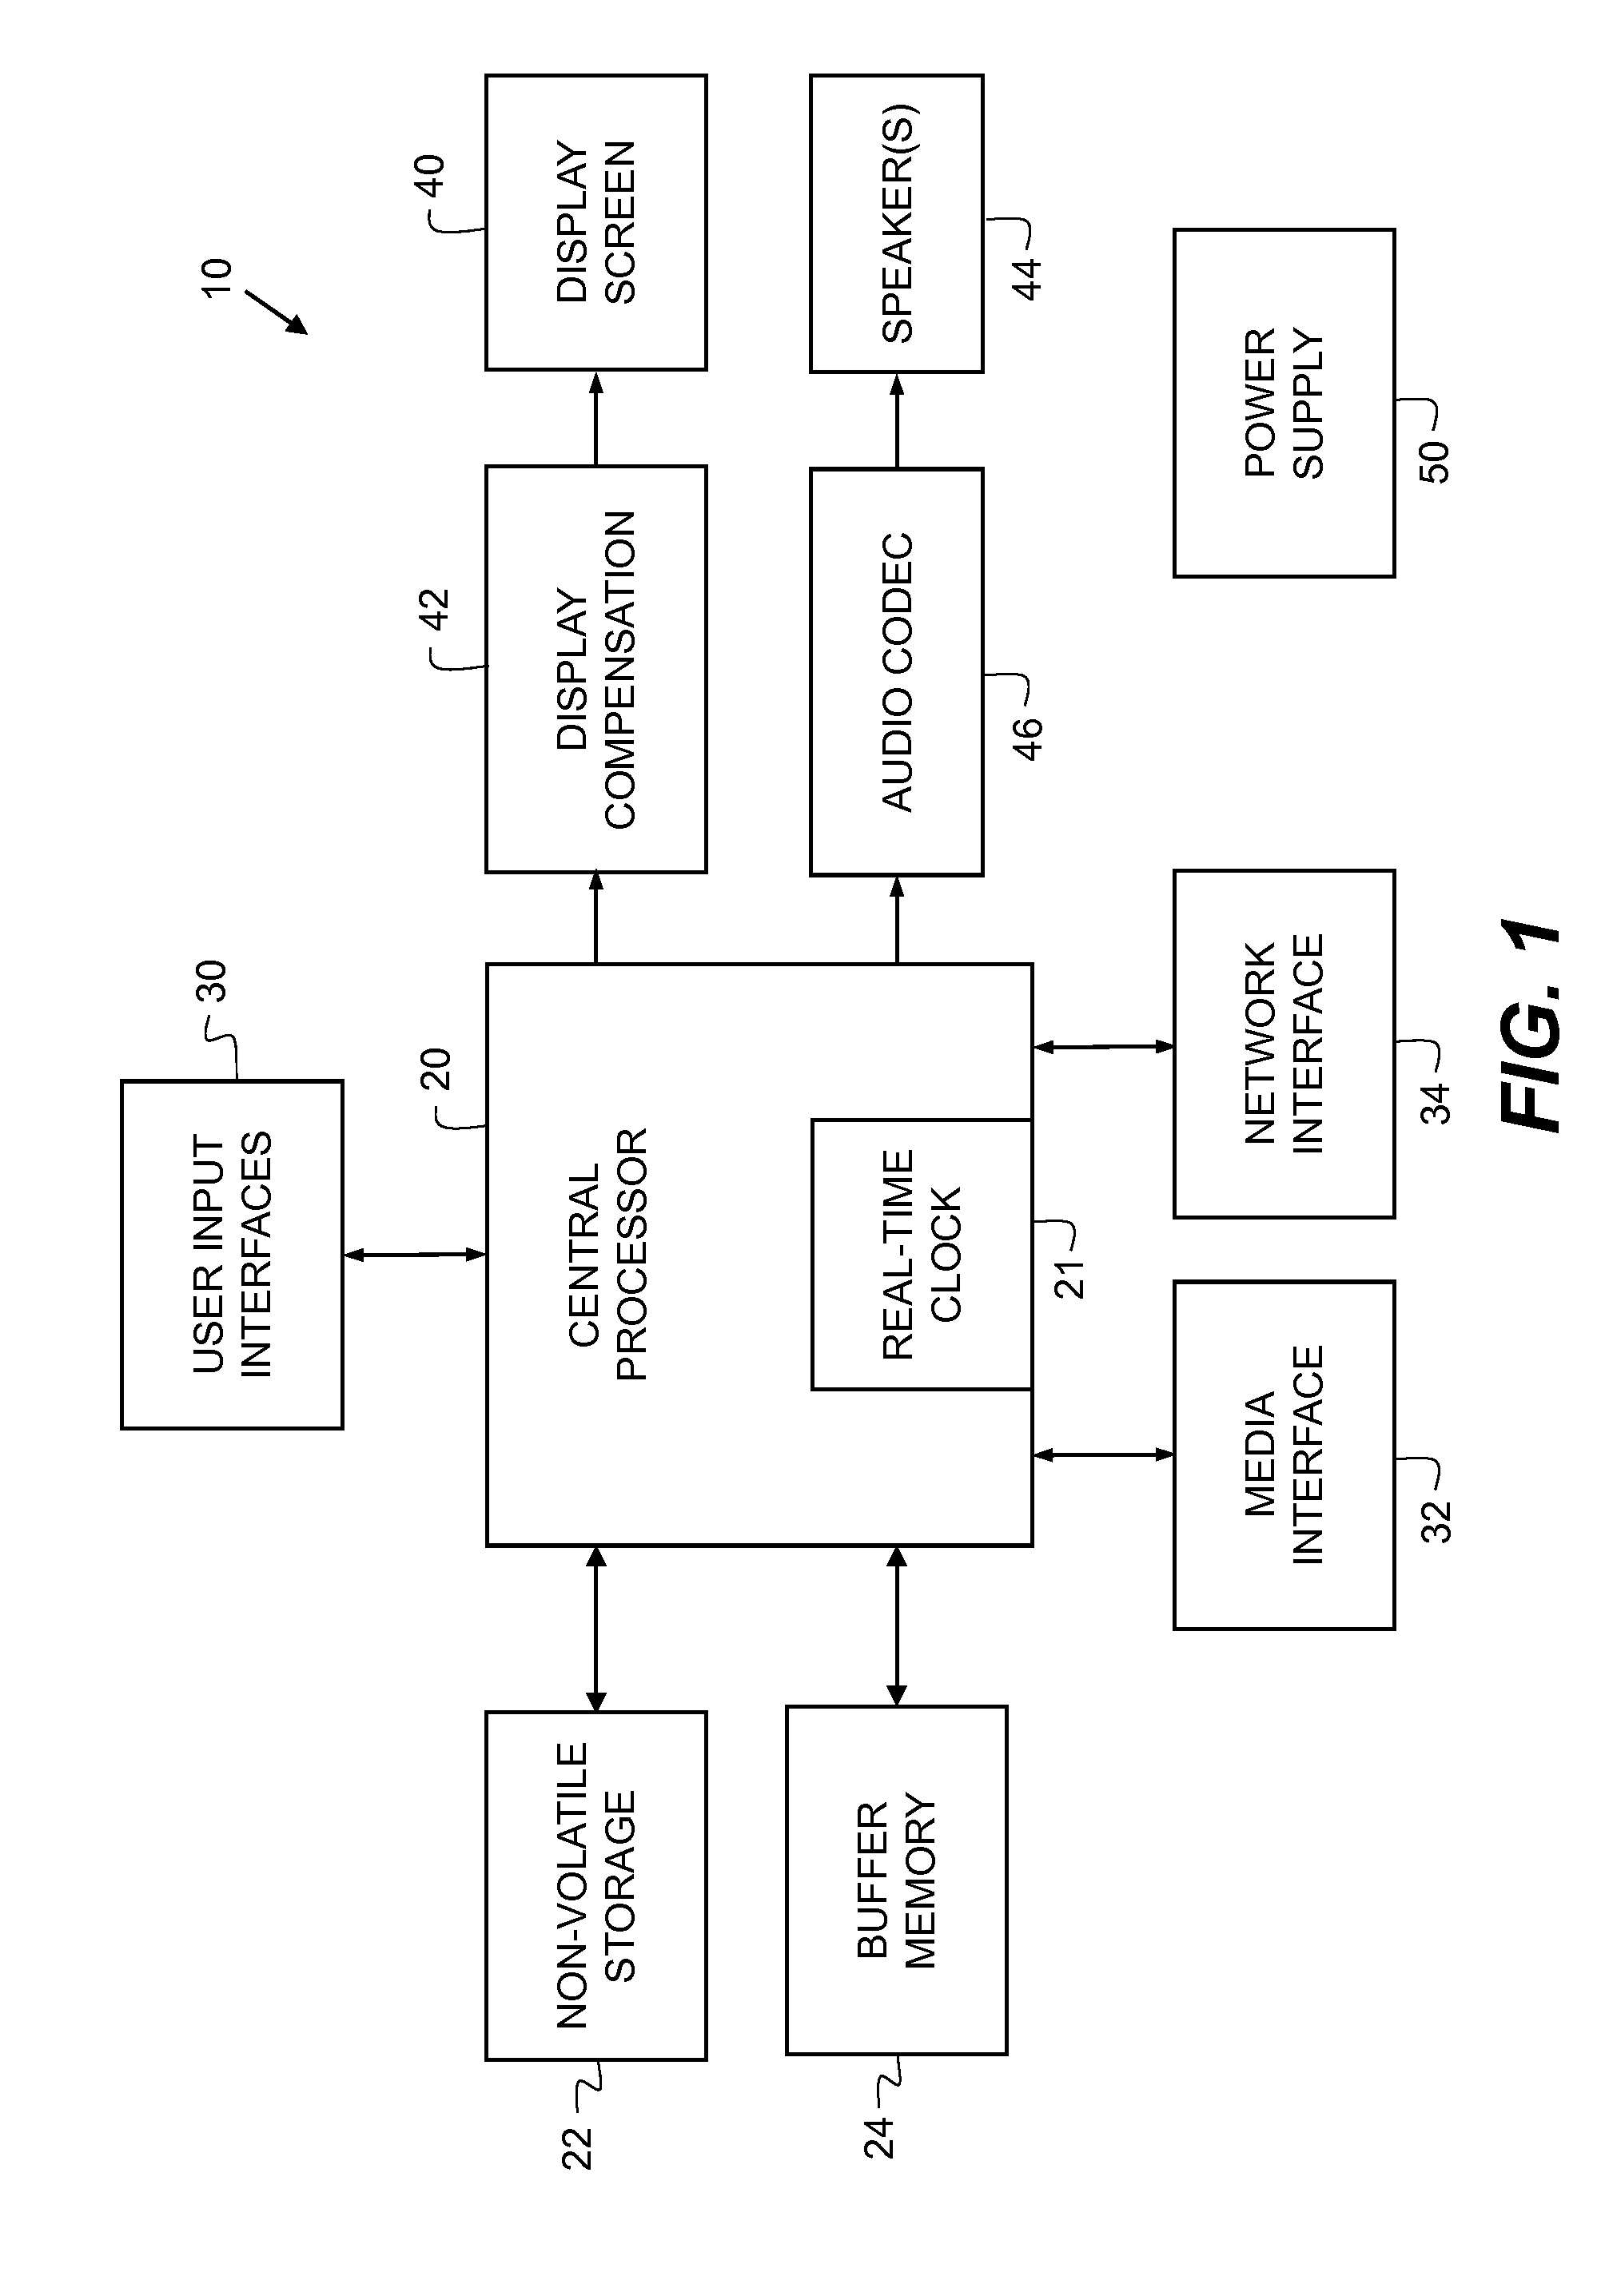 Digital image display device with automatically adjusted image display durations